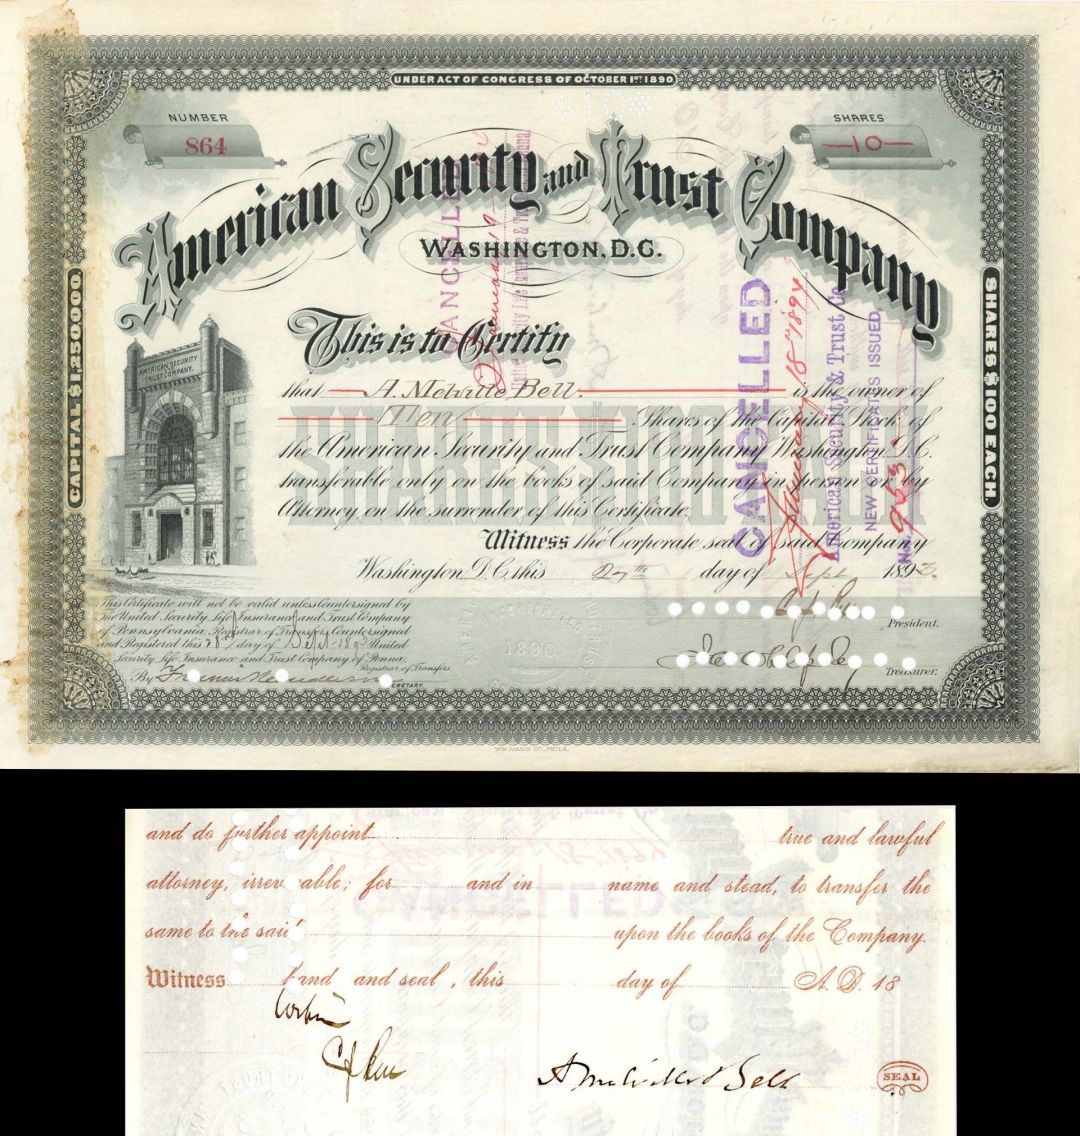 American Security and Trust Co. Issued to and Signed by A. Melville Bell - Stock Certificate